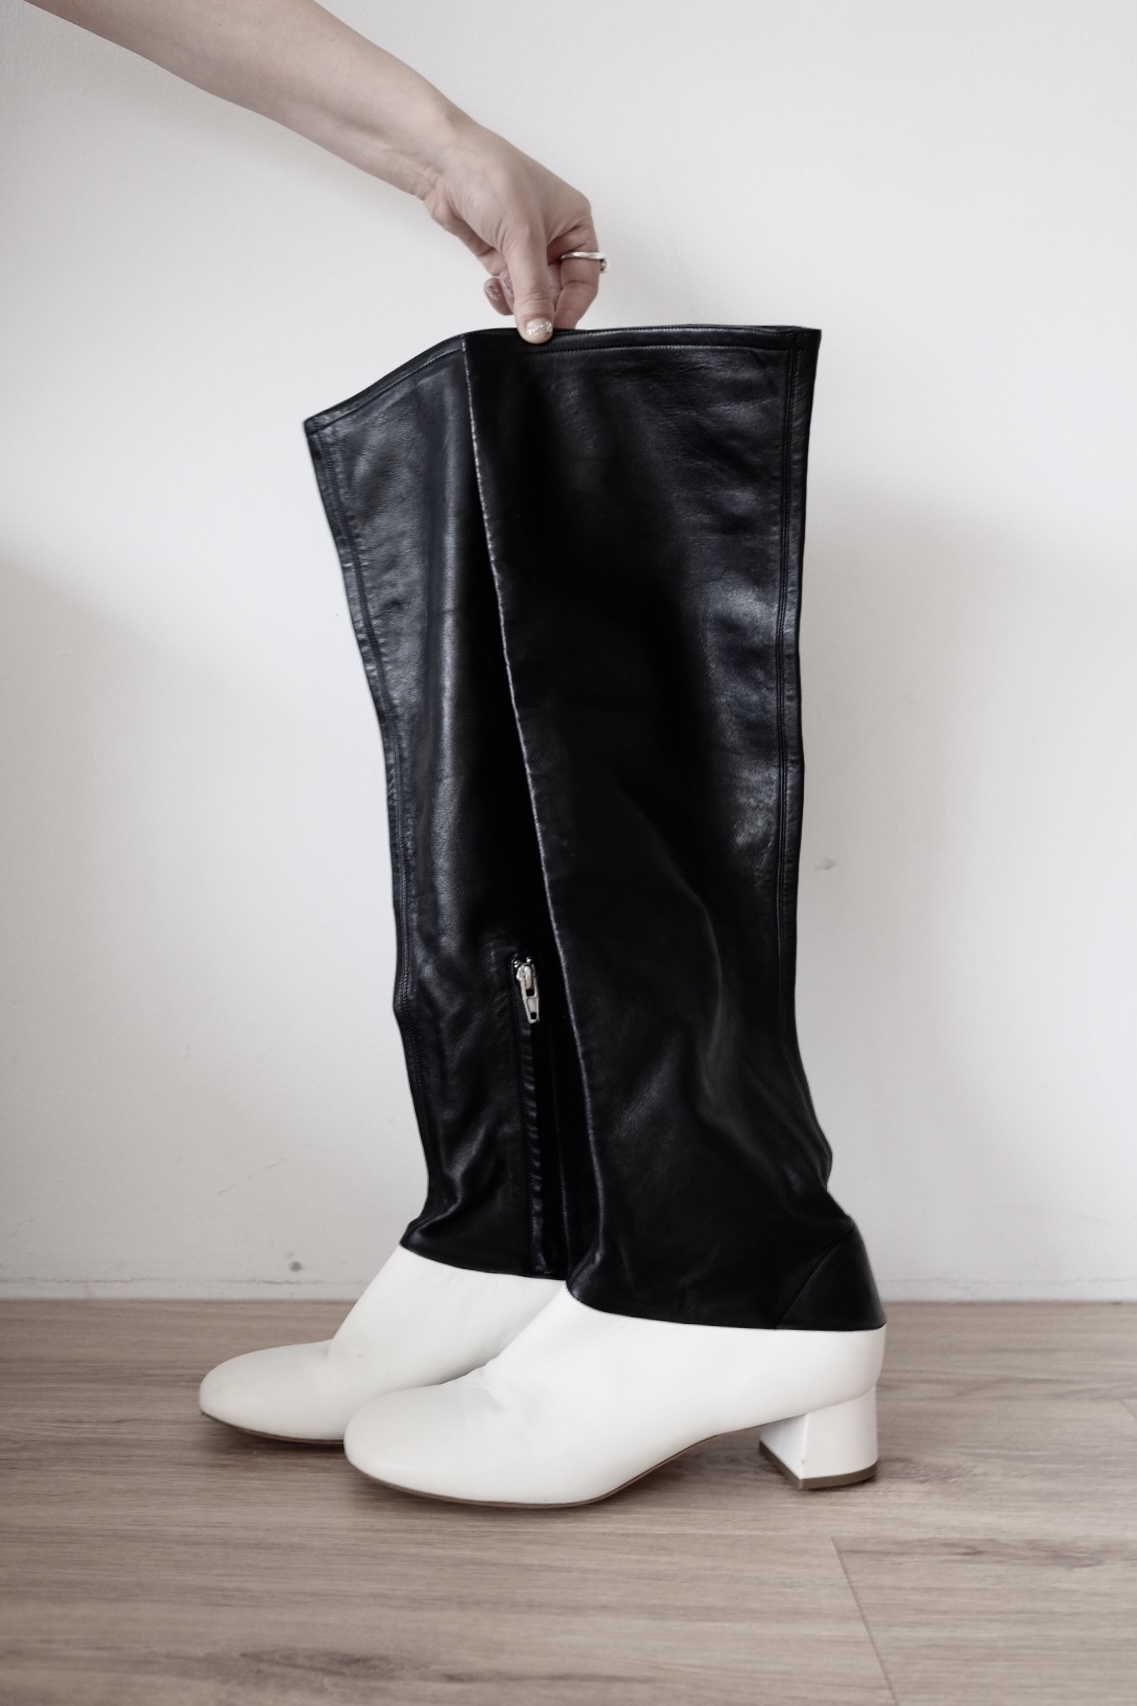 (one and only) Old celine two tone knee high boots, size 38